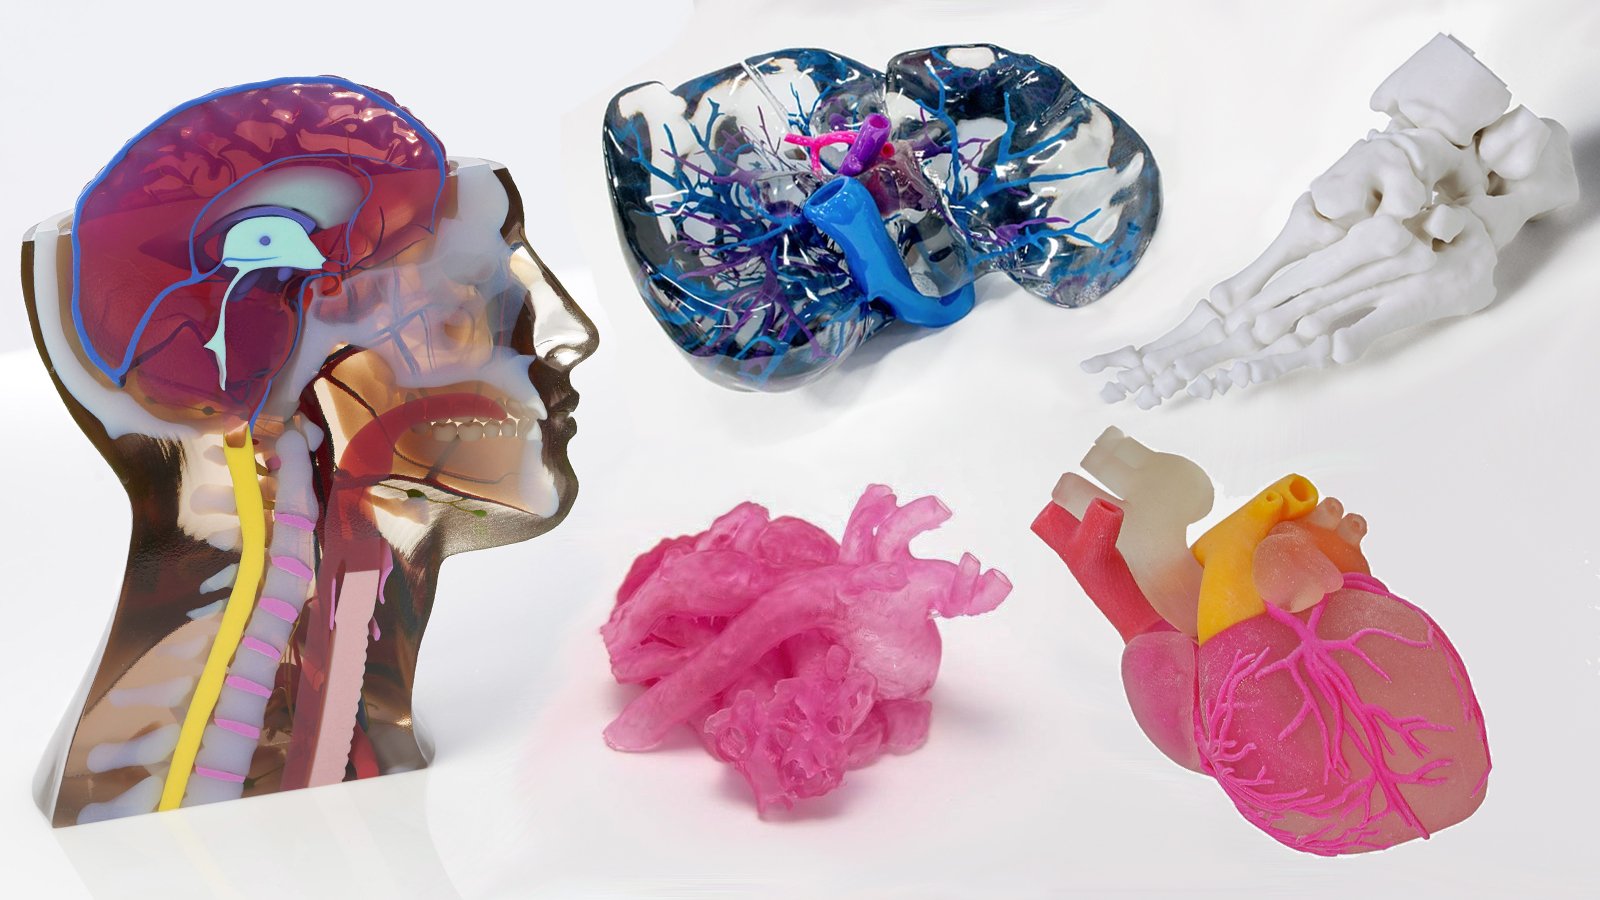 3D Printed Medical Models – State of the Art